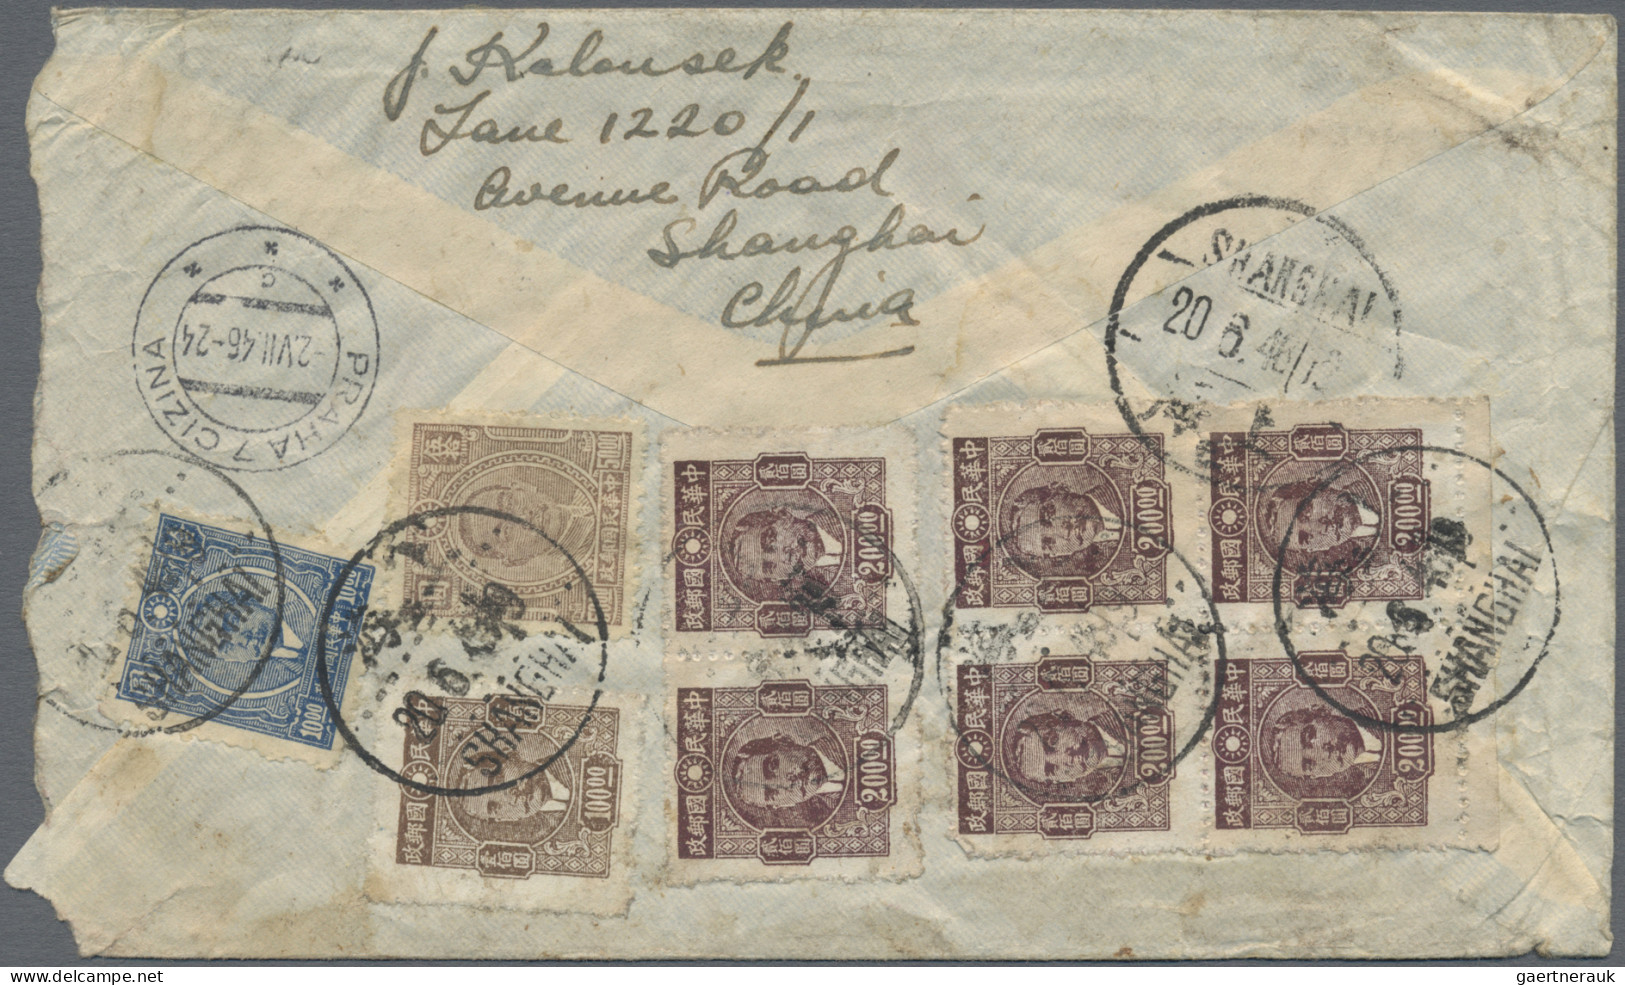 China: 1897/1962 (ca.), group of 17 covers/stationery inc. Taiwan and HK, with 1